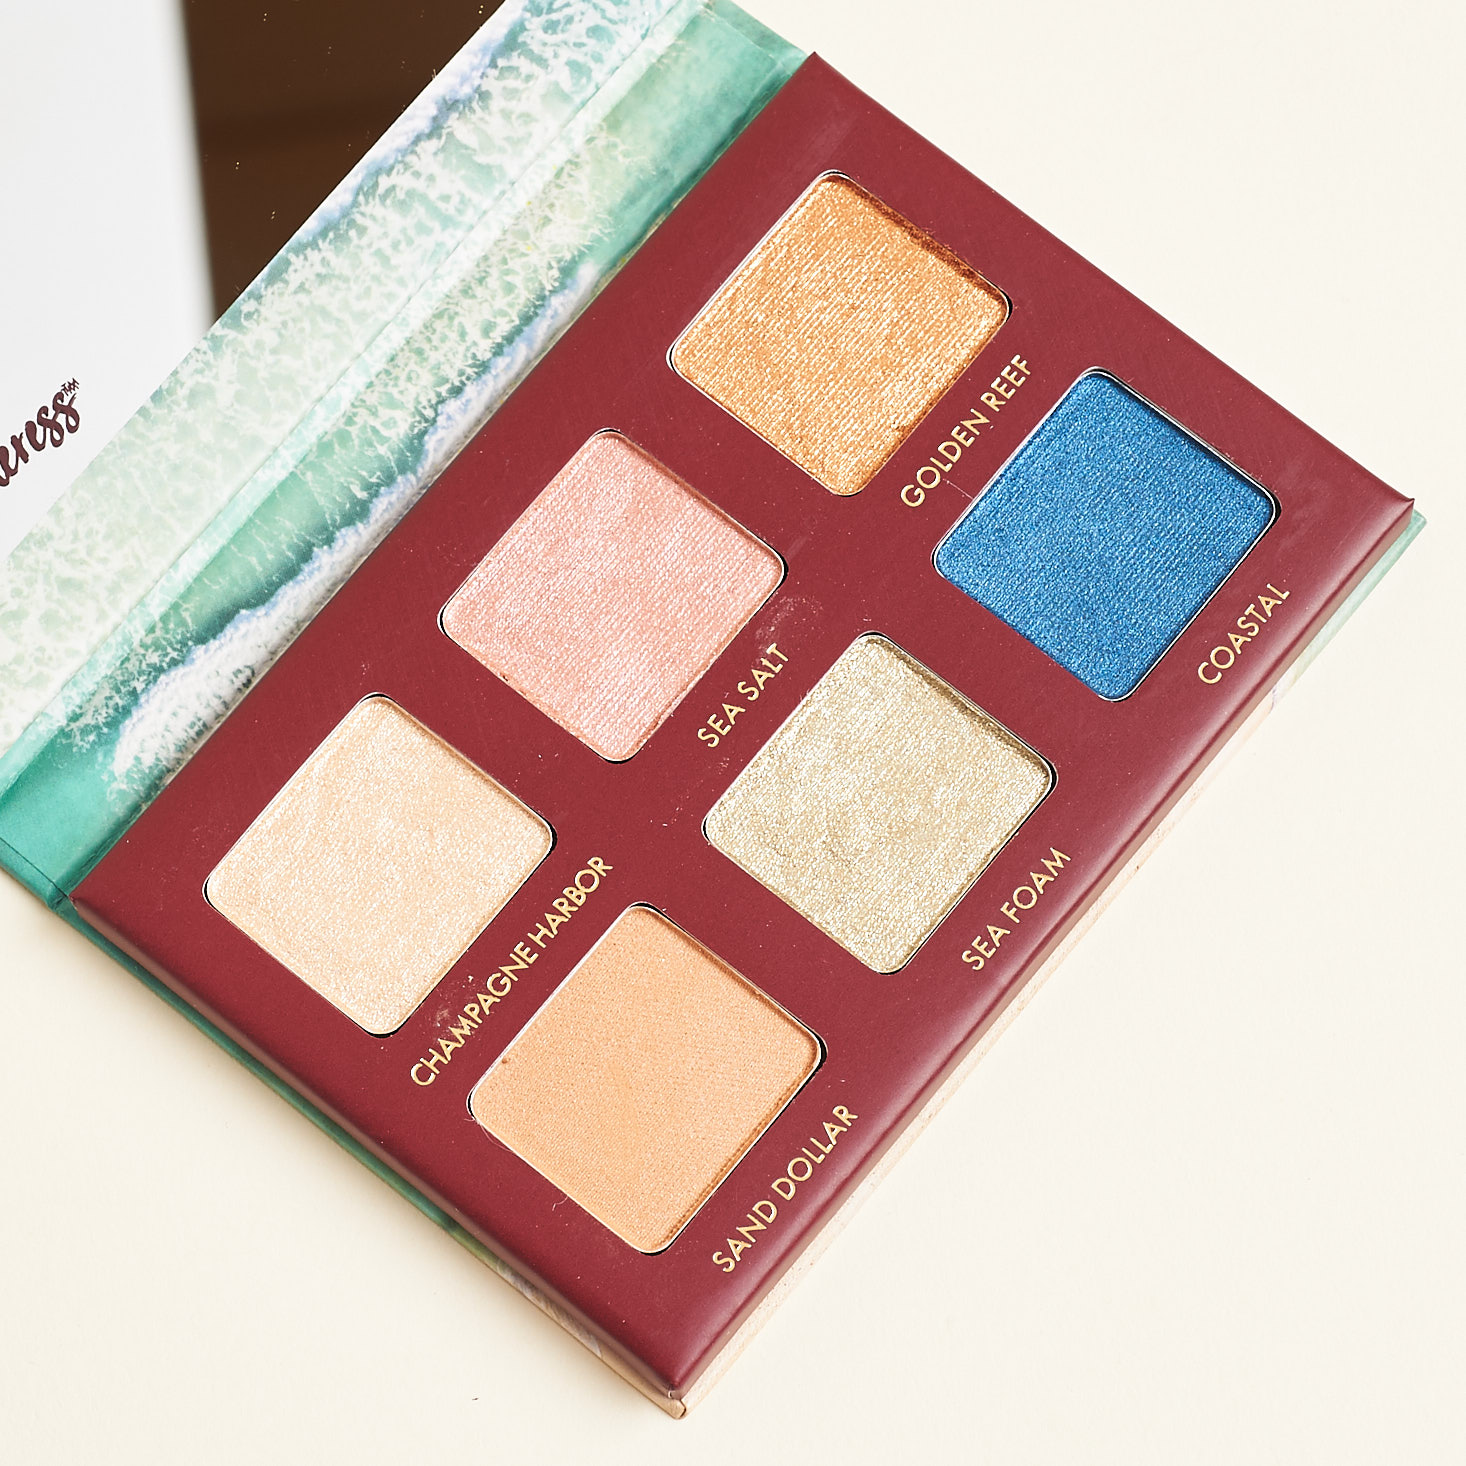 Ipsy Glam Bag Plus May 2019 beauty box review palette open